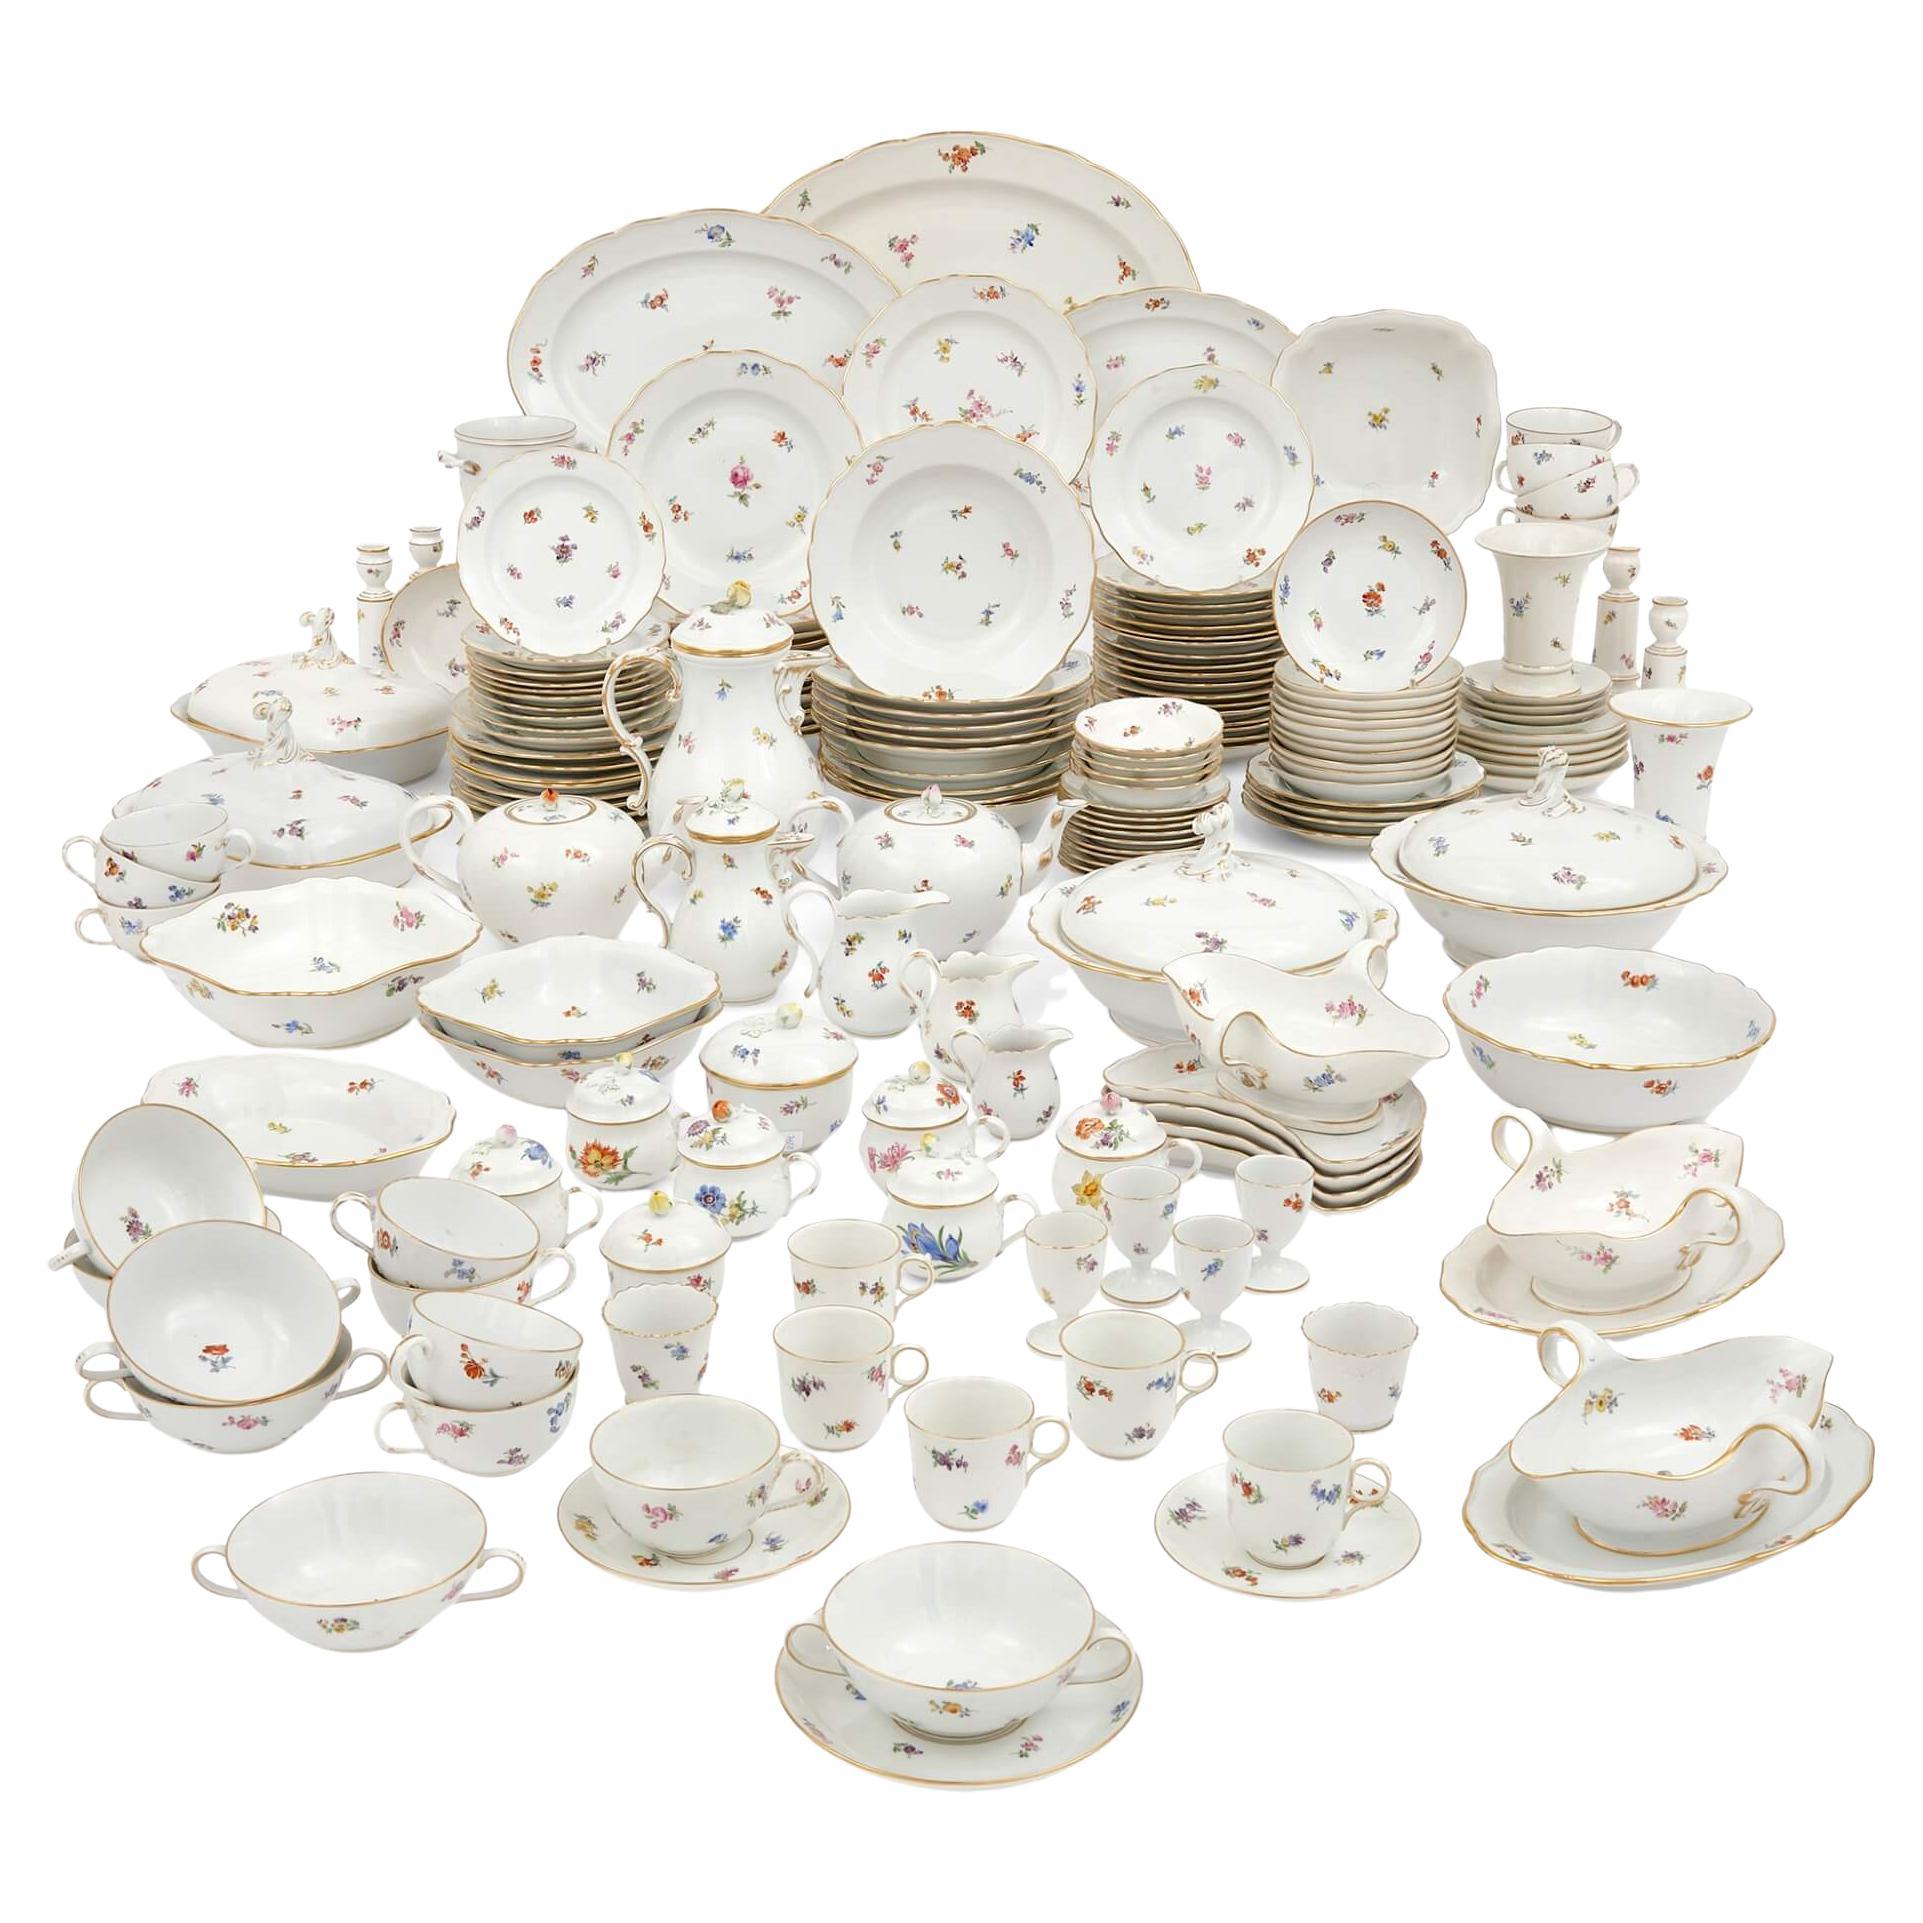 Very Large Meissen Porcelain Dinner Service with Floral Motifs